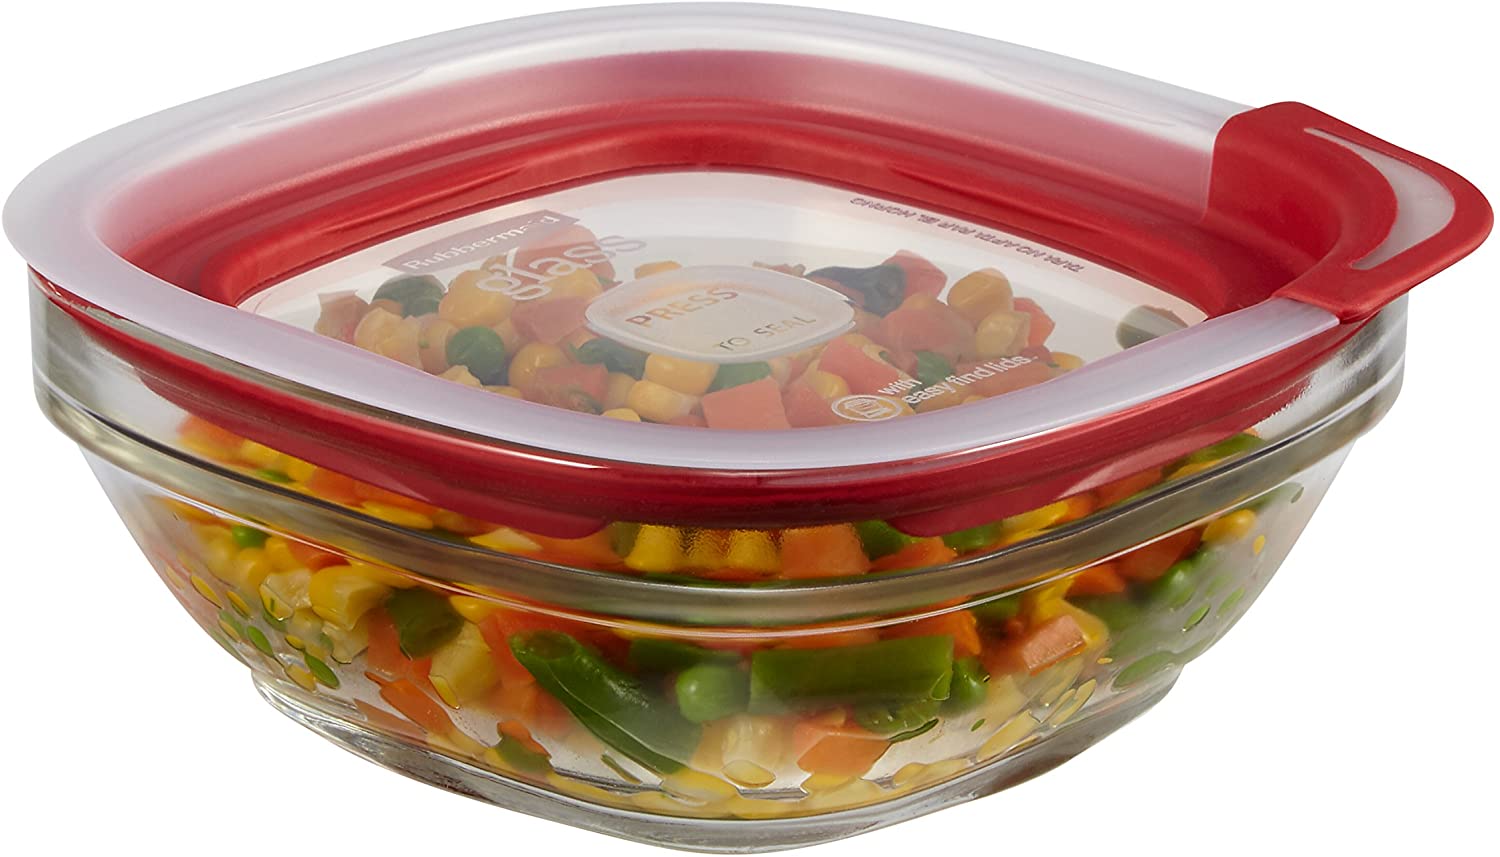 Rubbermaid EasyFindLids Glass Food Storage Container, 591ml, Racer Red